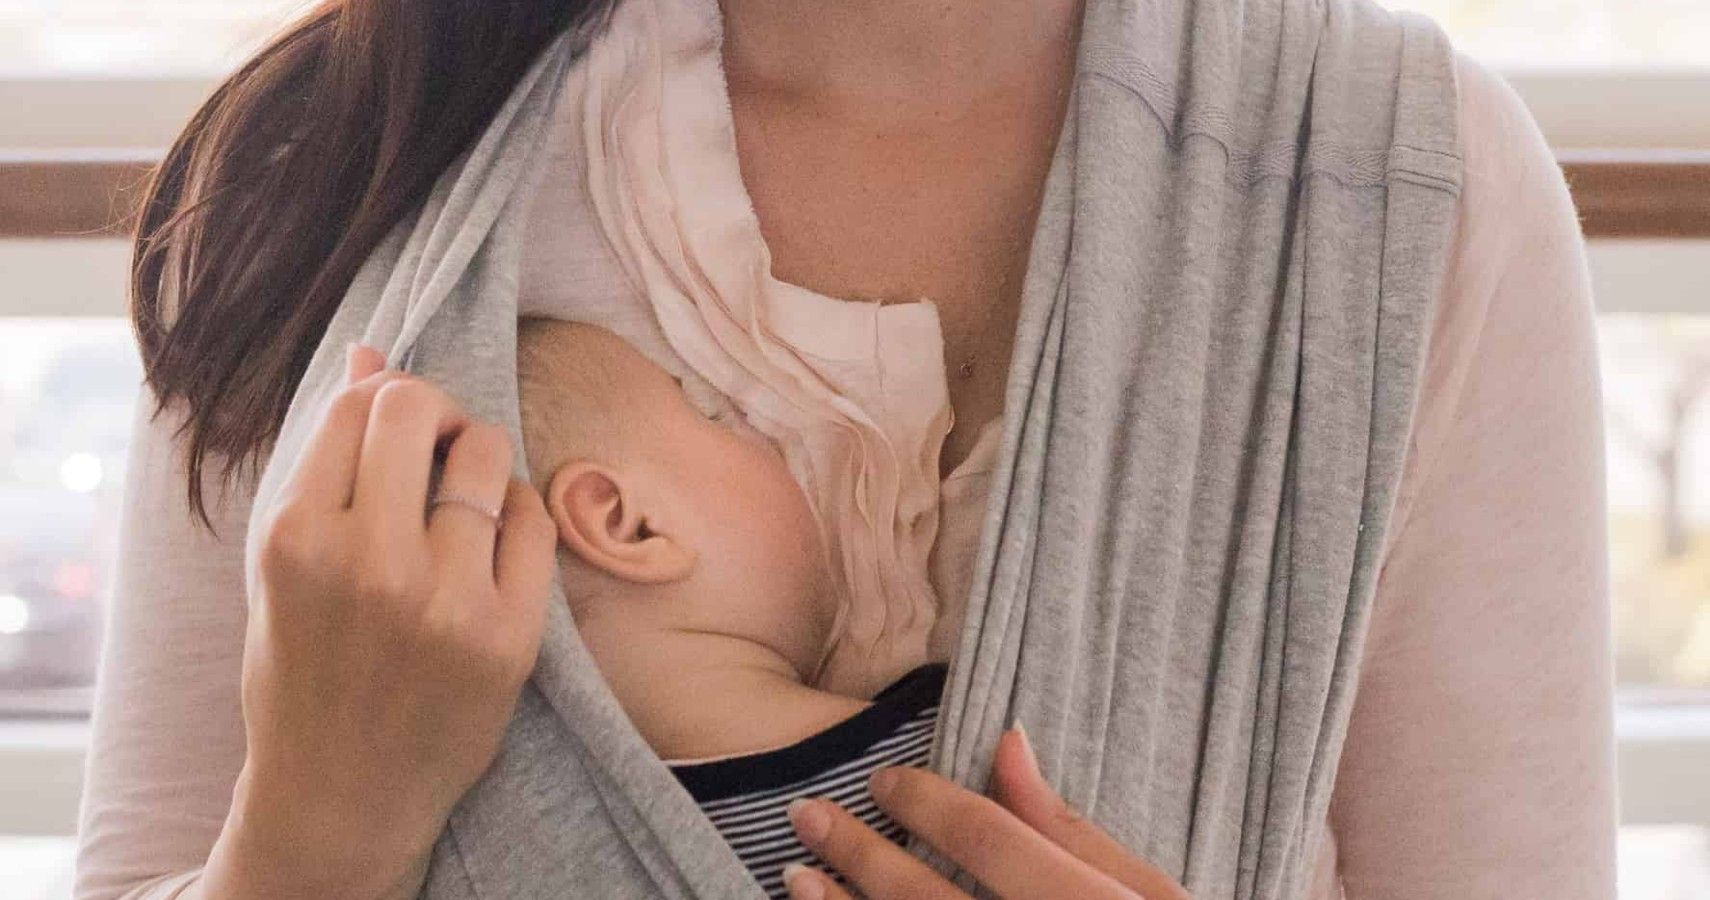 Infant Carriers May Increase Duration Of Breastfeeding, Per Study